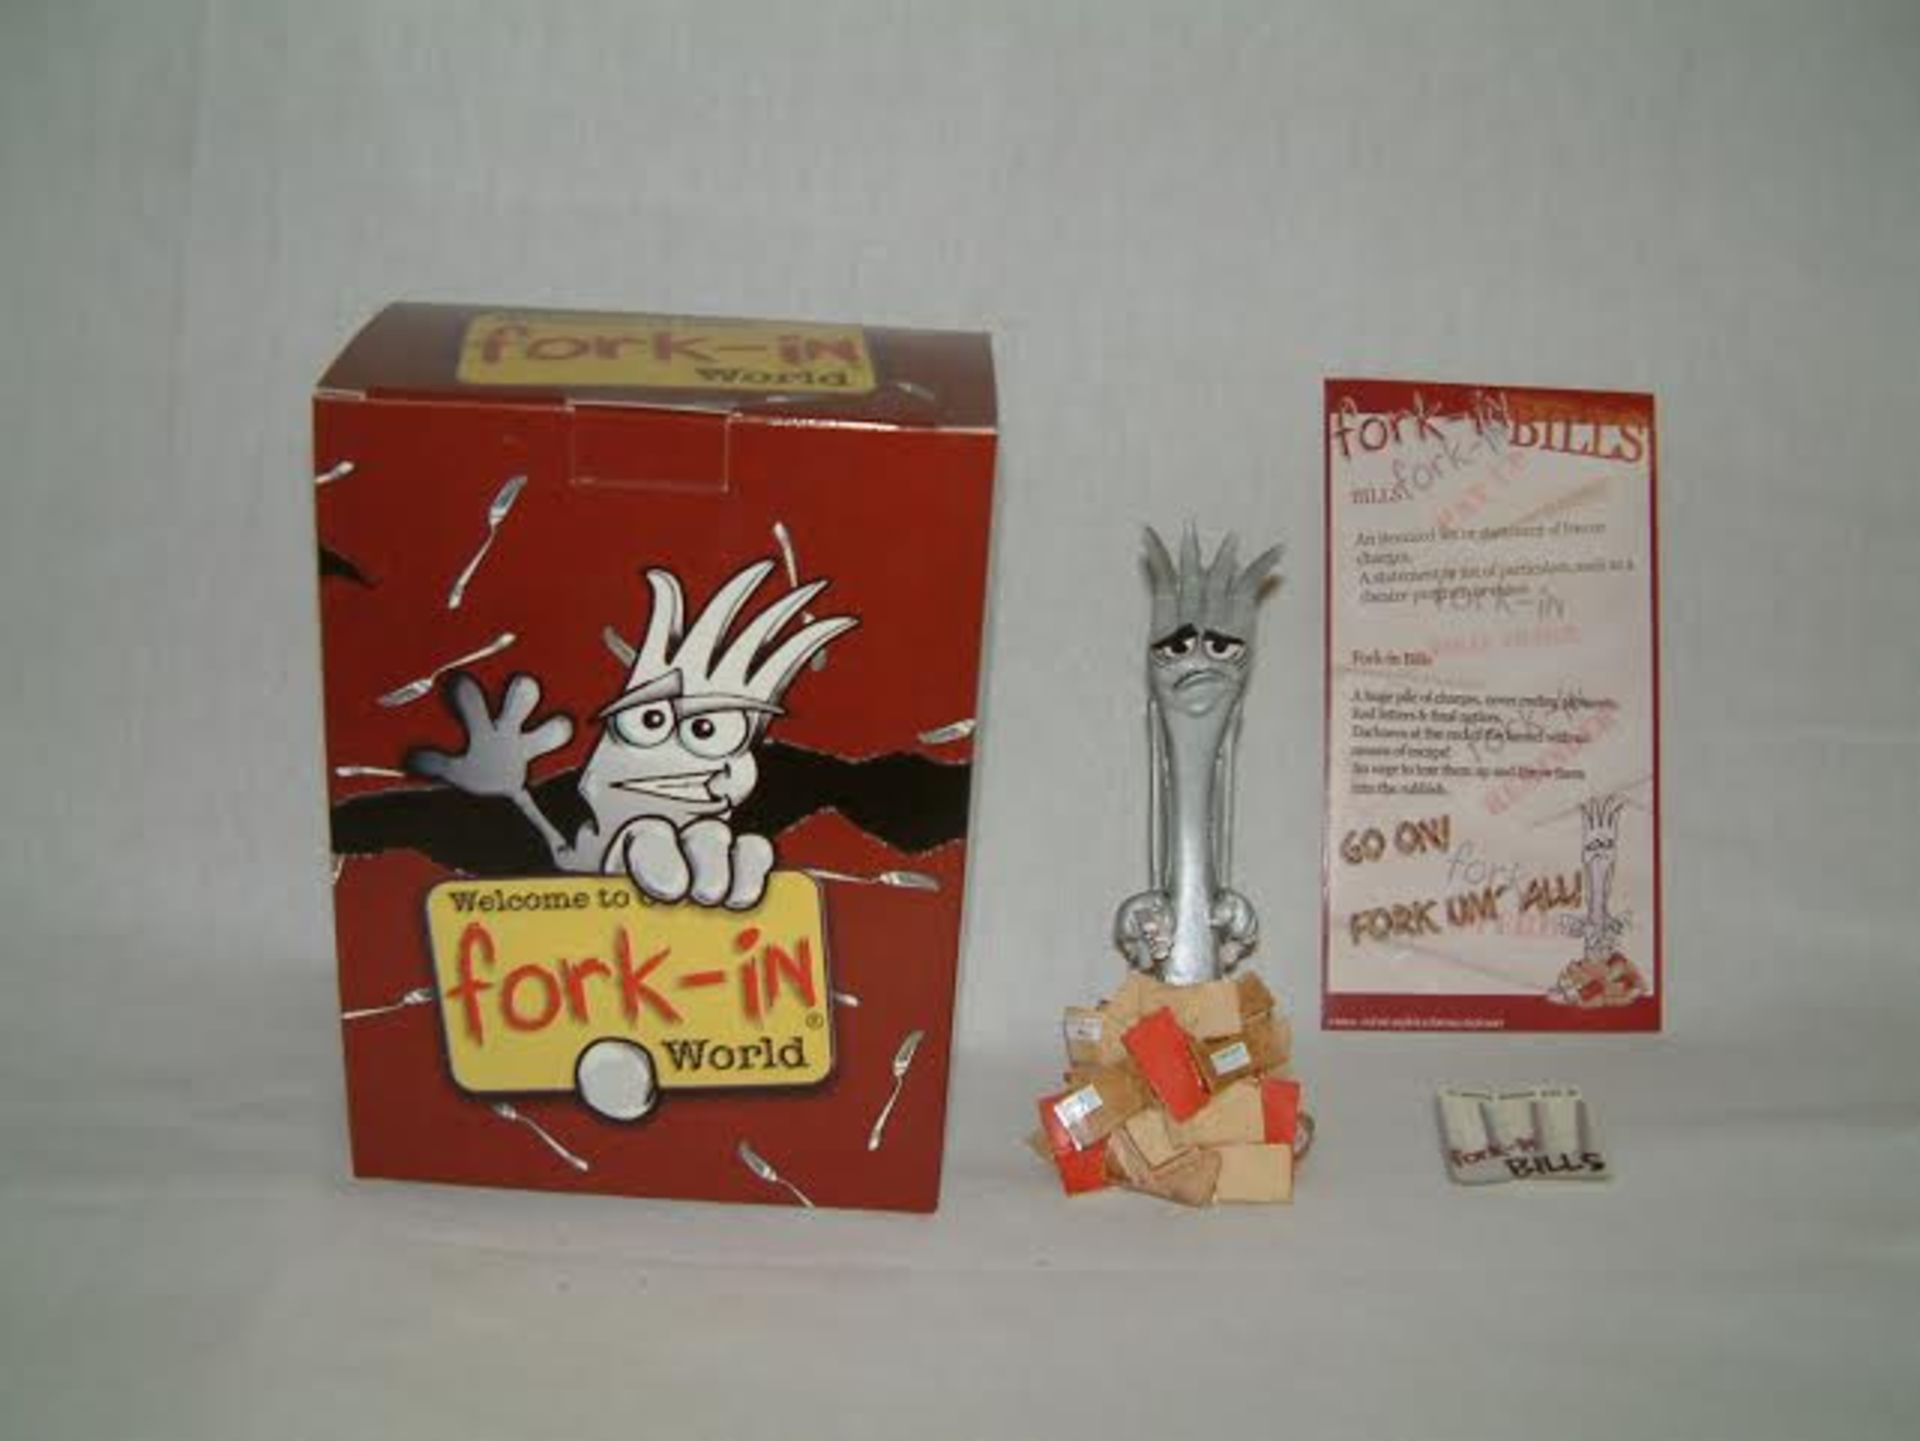 48x ‘Bills’ Fork-In Novelty Figures. All are made from resin and hand painted. Rrp is £14.99.